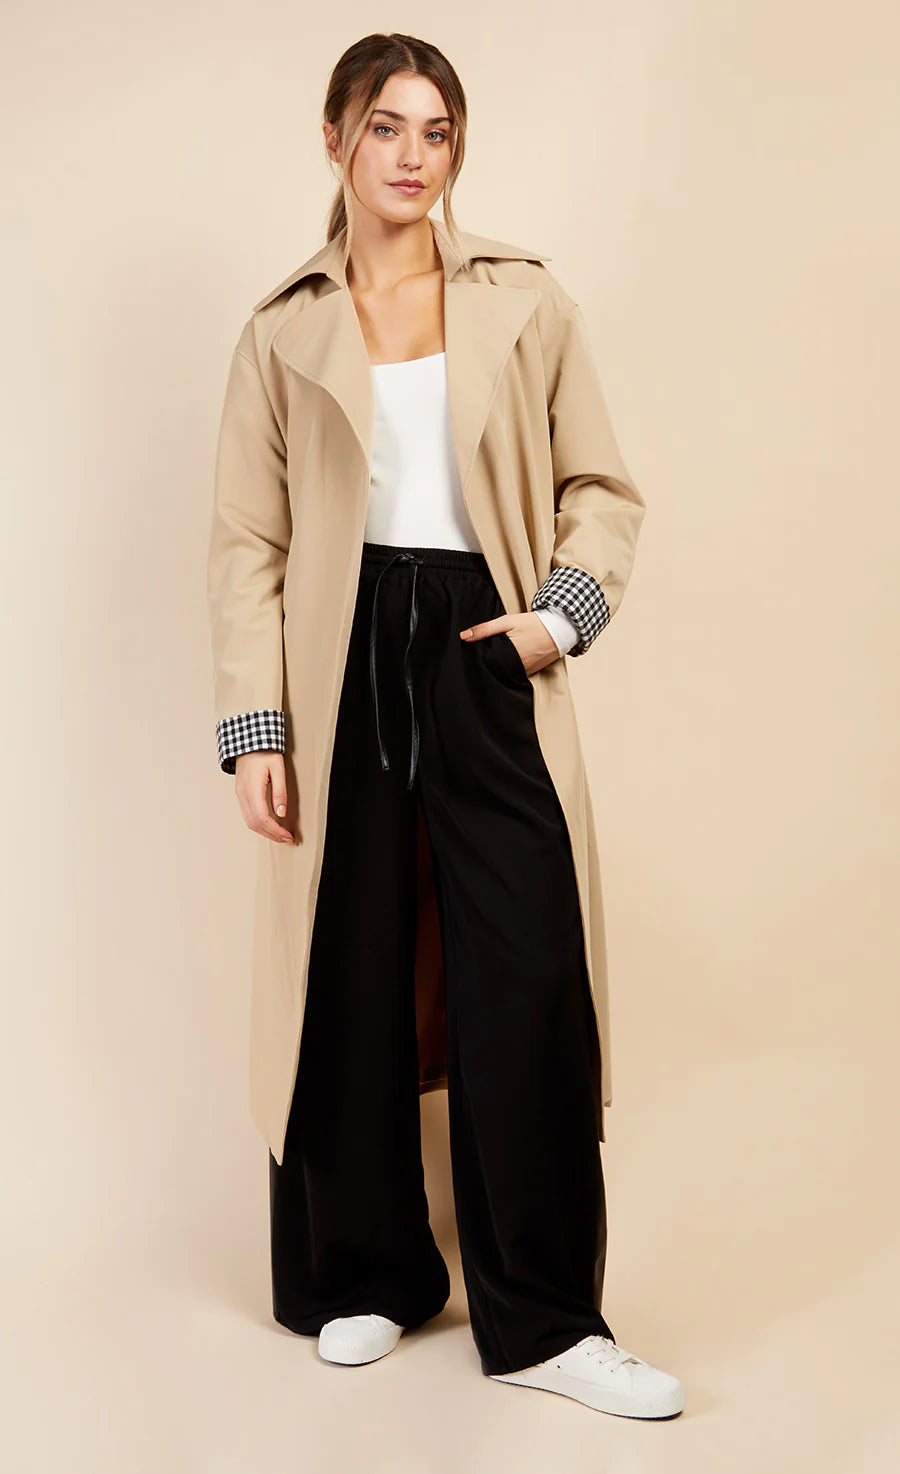 Little Mistress Camel Trench Coat by Vogue Williams